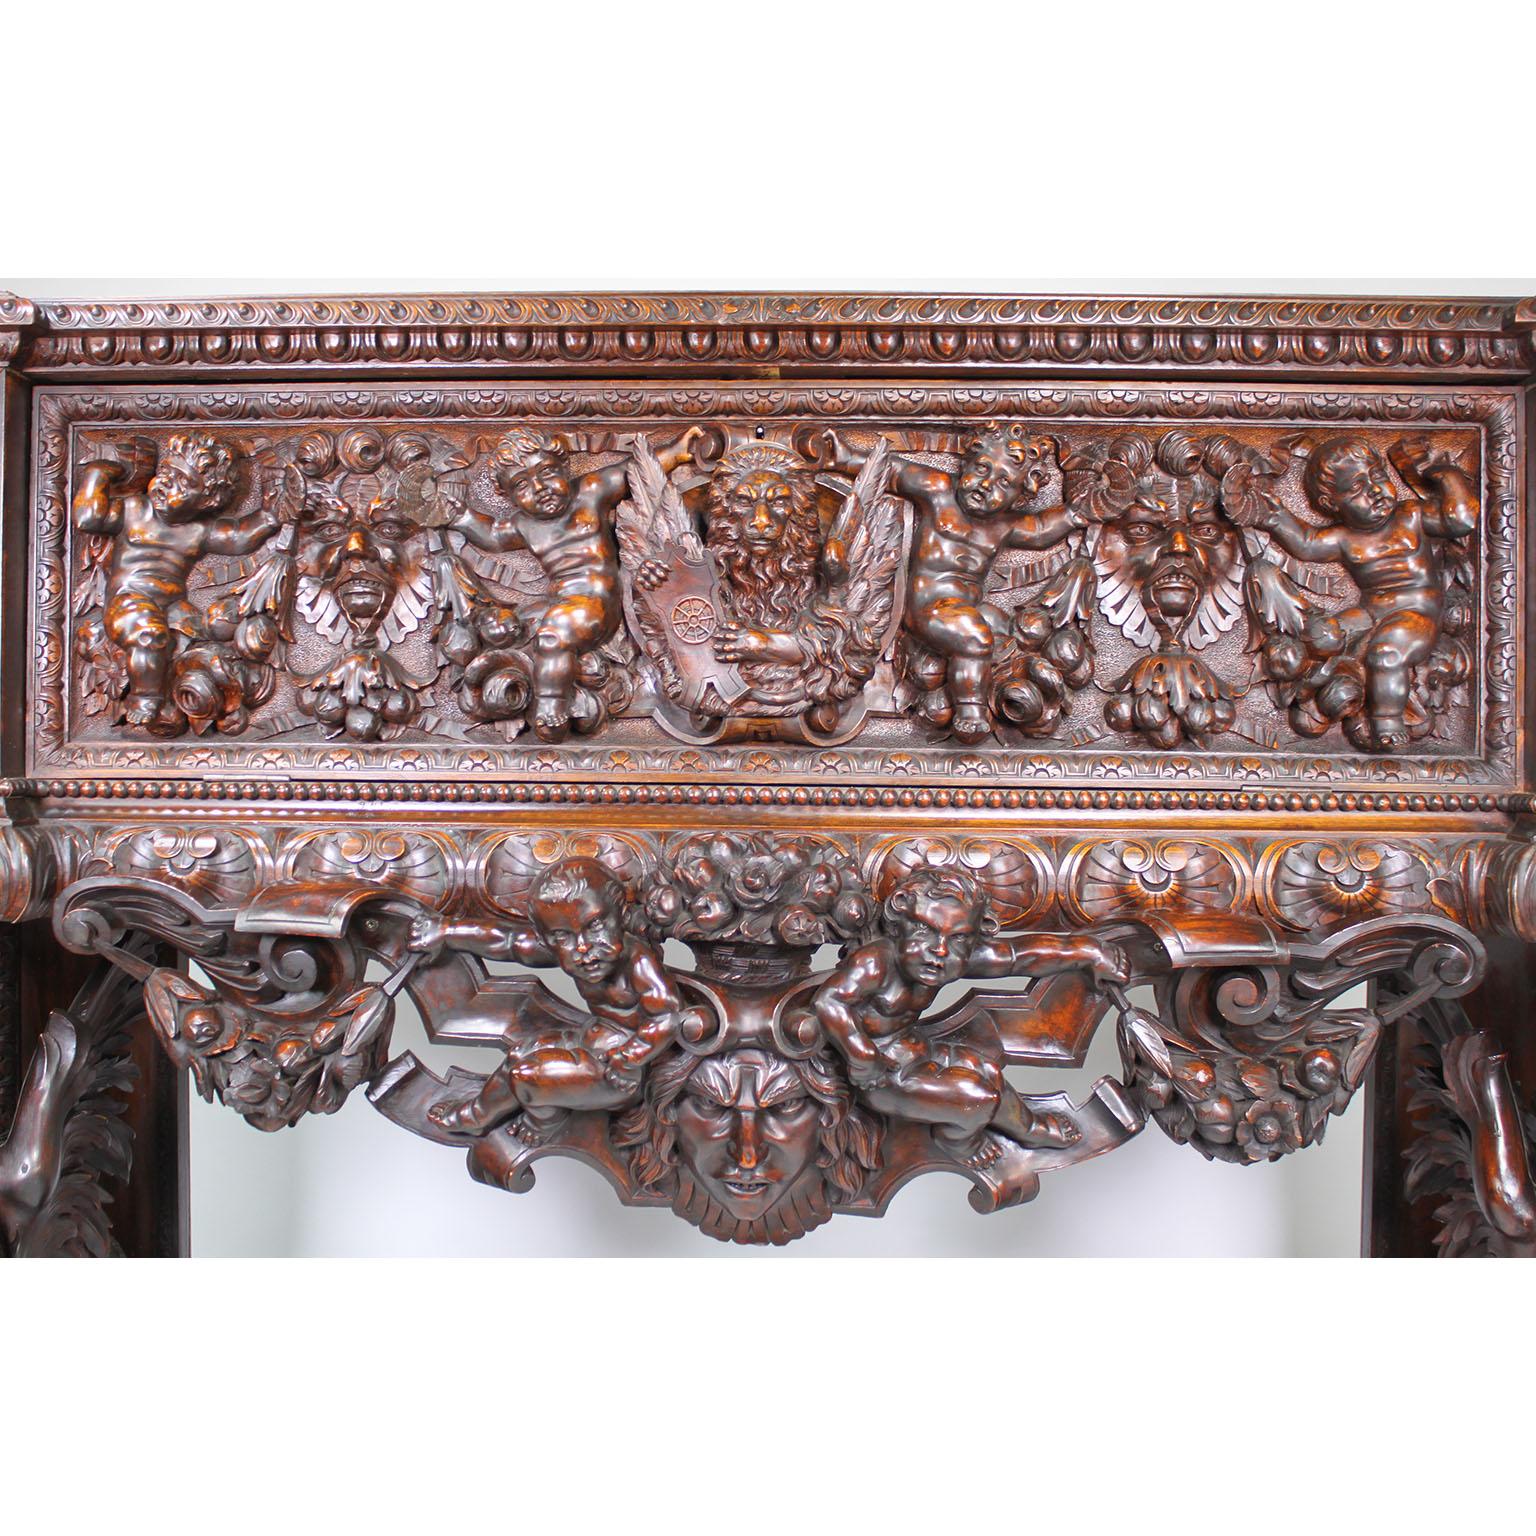 Baroque Revival Italian 19th Century Carved Walnut Cassone Chest with Putti and Winged Dragons For Sale